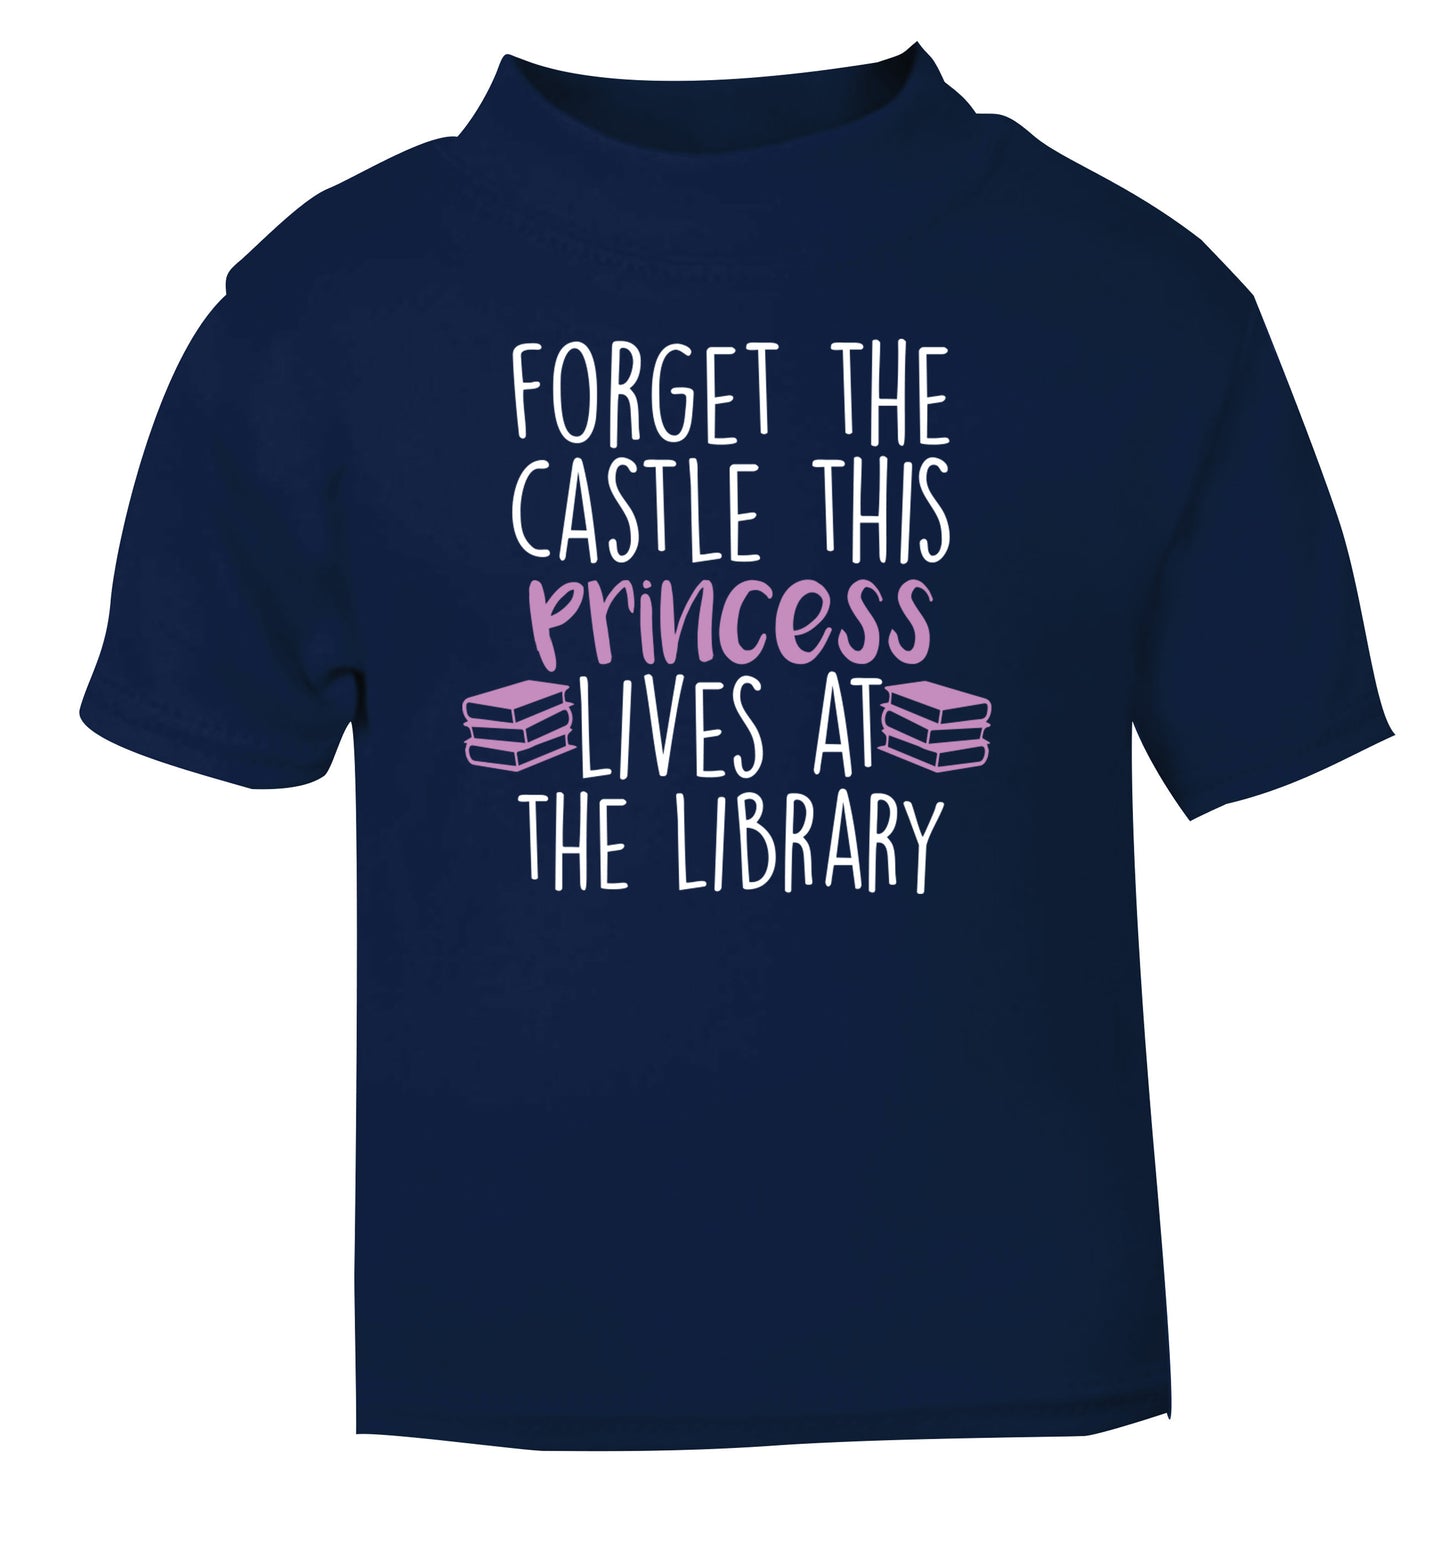 Forget the castle this princess lives at the library navy Baby Toddler Tshirt 2 Years